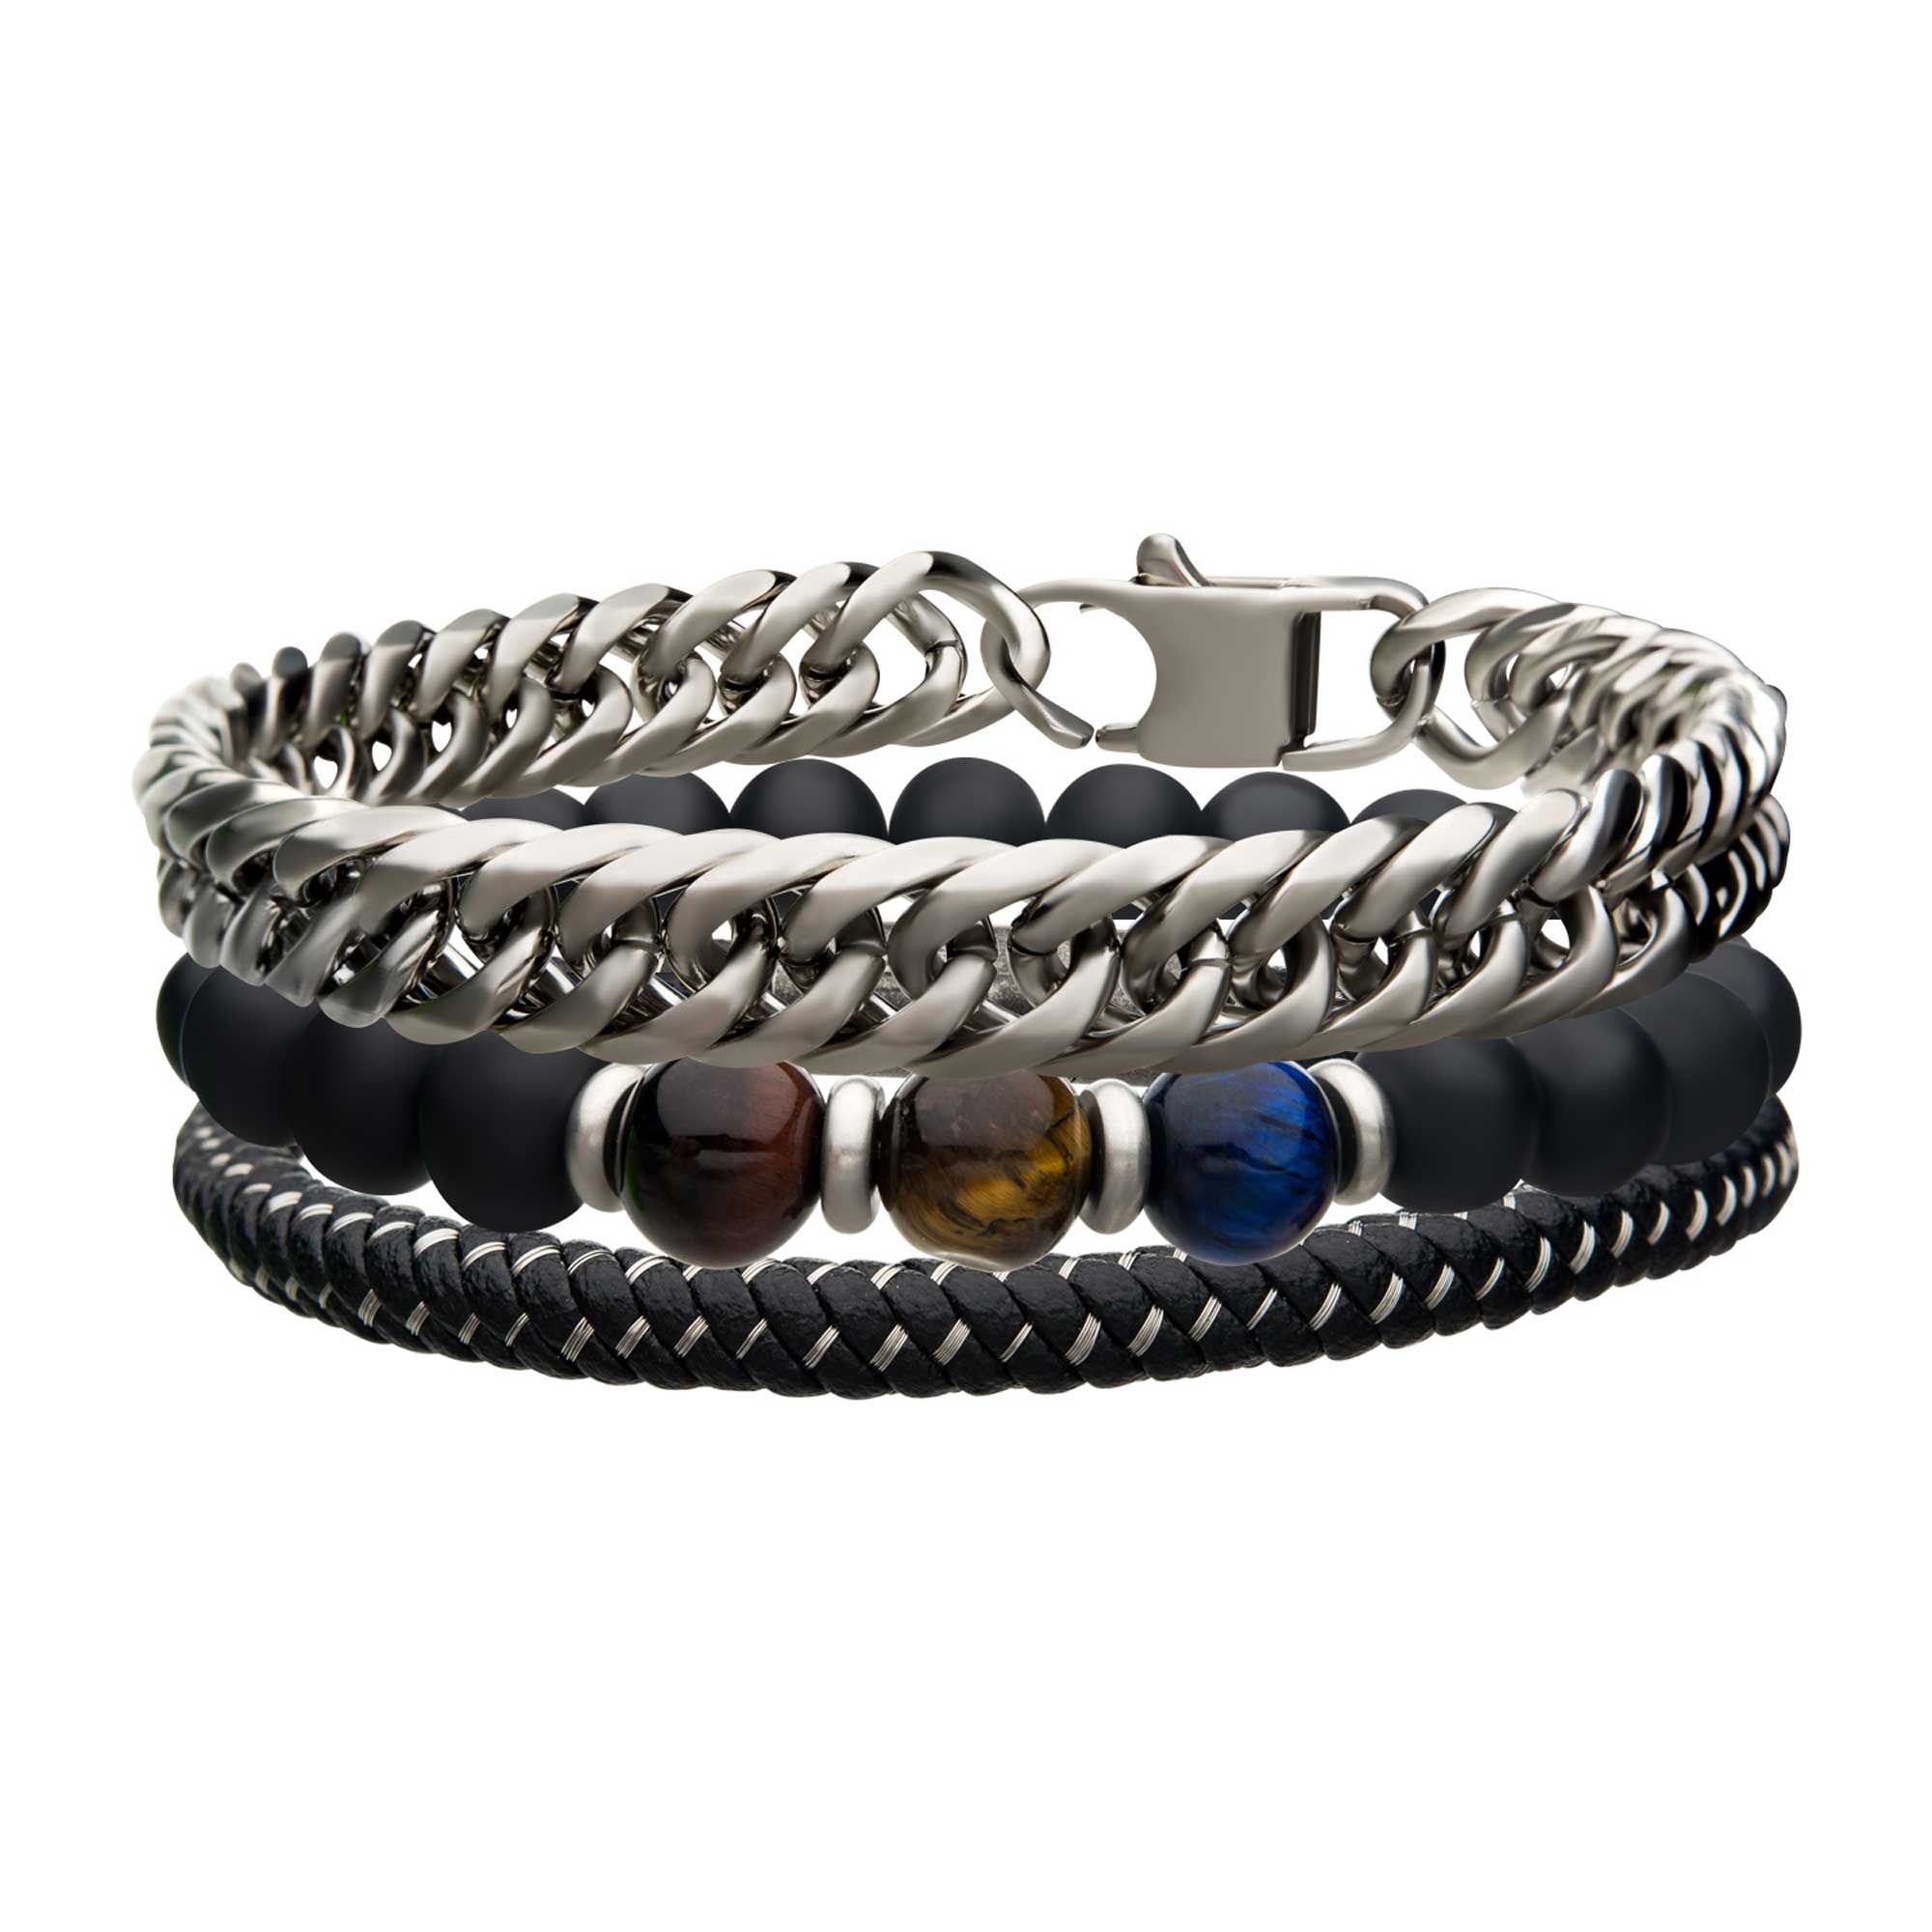 BRACELETS Black Braided Leather, Stone Beads Stainless Steel Curb Chain Stackable Bracelet brsetb15 -Rebel Bod-RebelBod